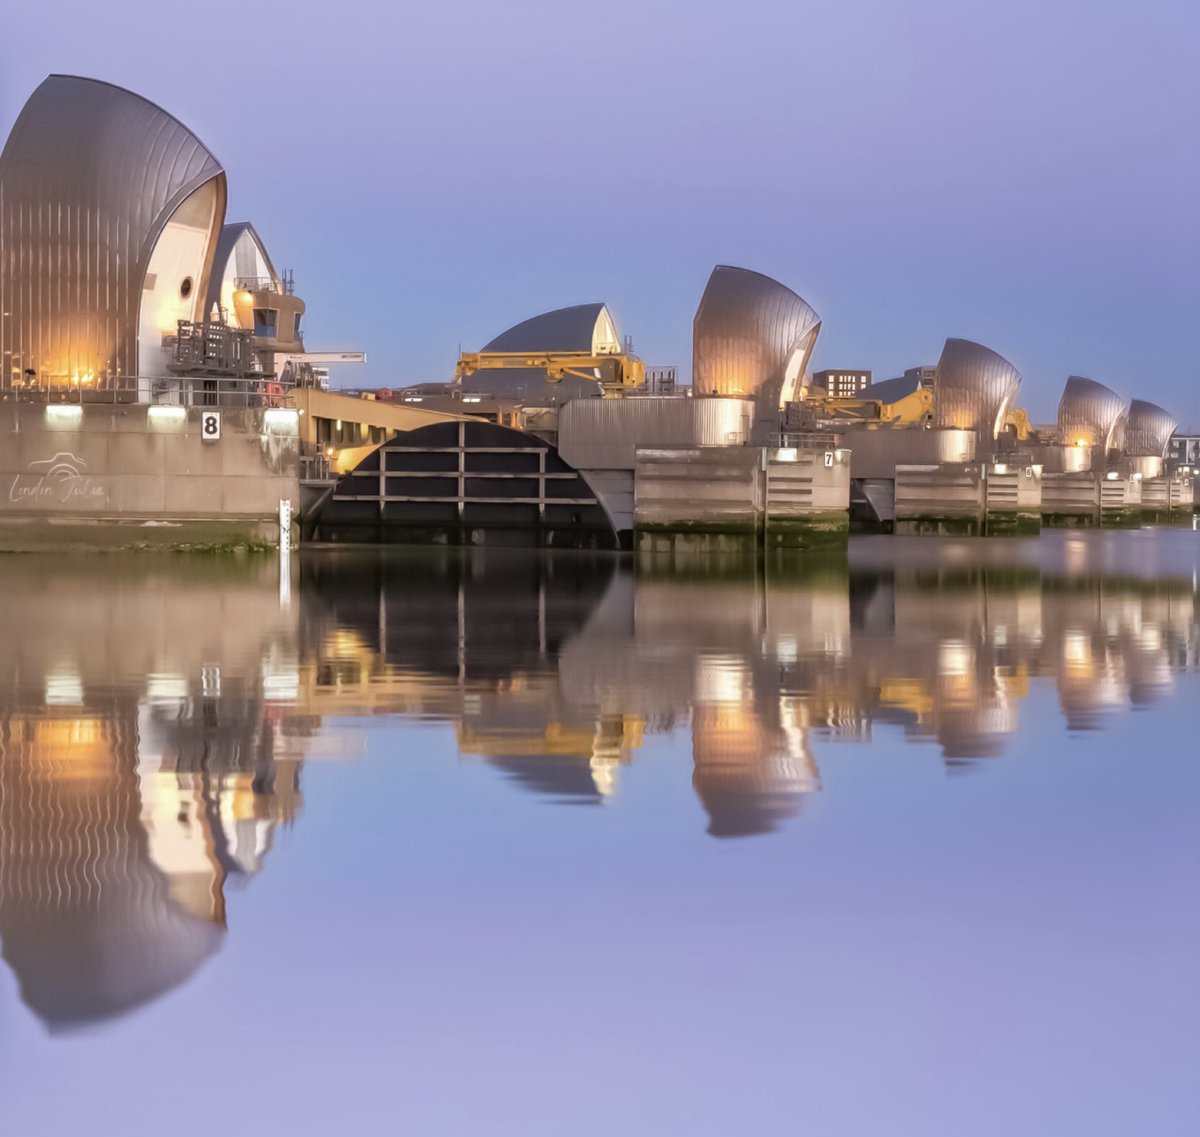 The Thames Barrier this morning. Industrial beauty 💙 @ThamesPathNT @ThamesPics #thamesbarrier